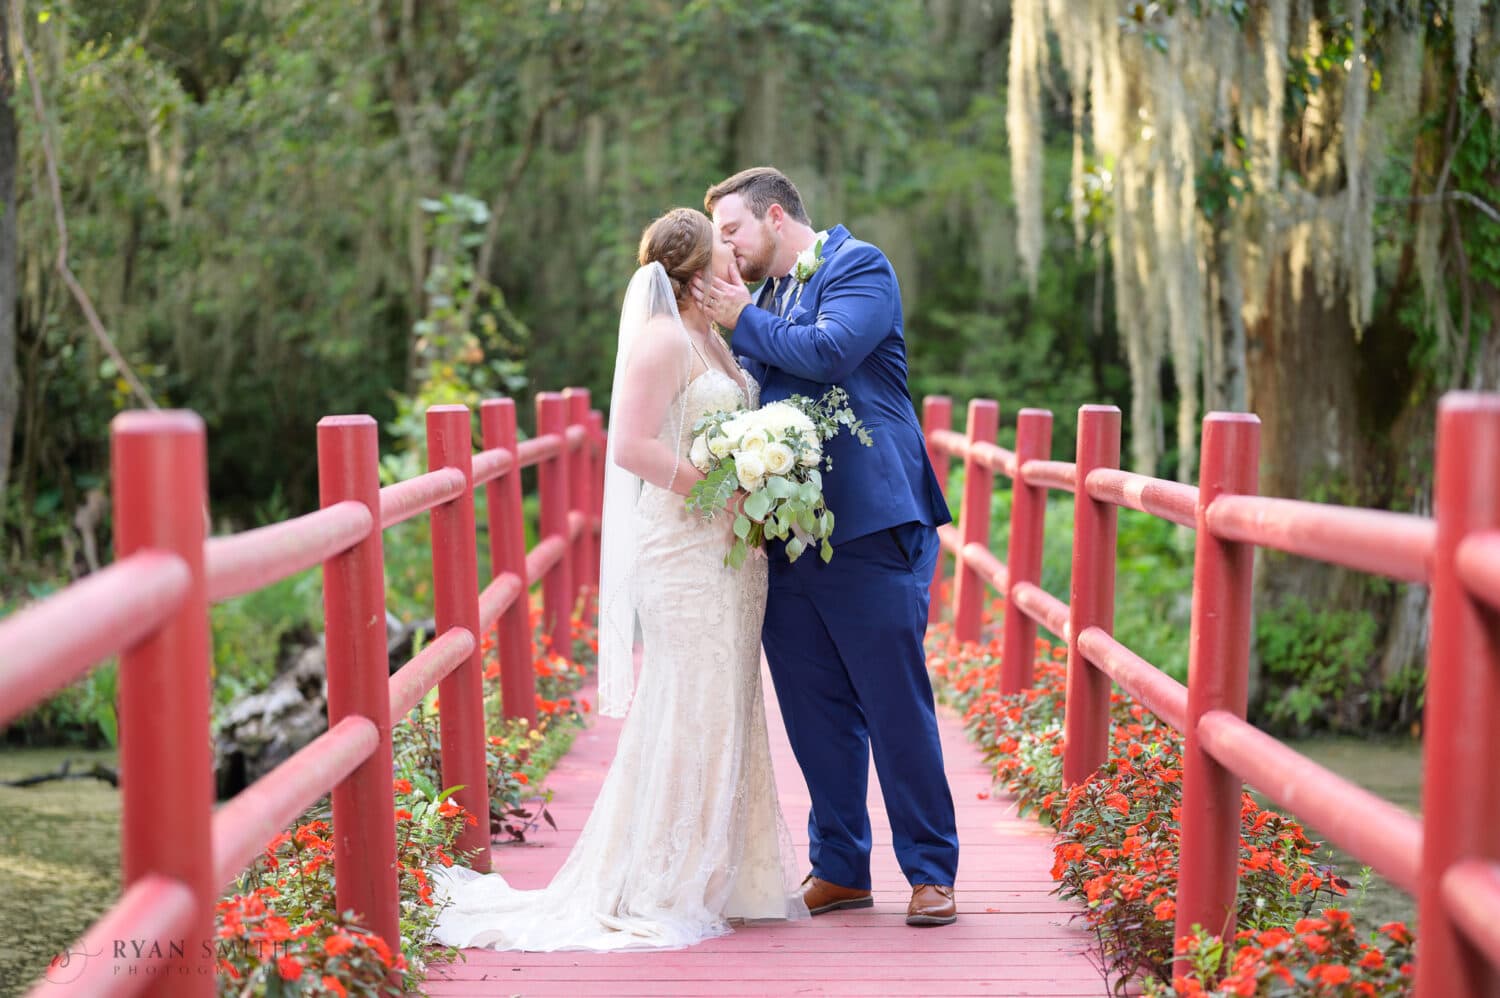 Portraits of the bride and groom on the red bridge - Magnolia Plantation